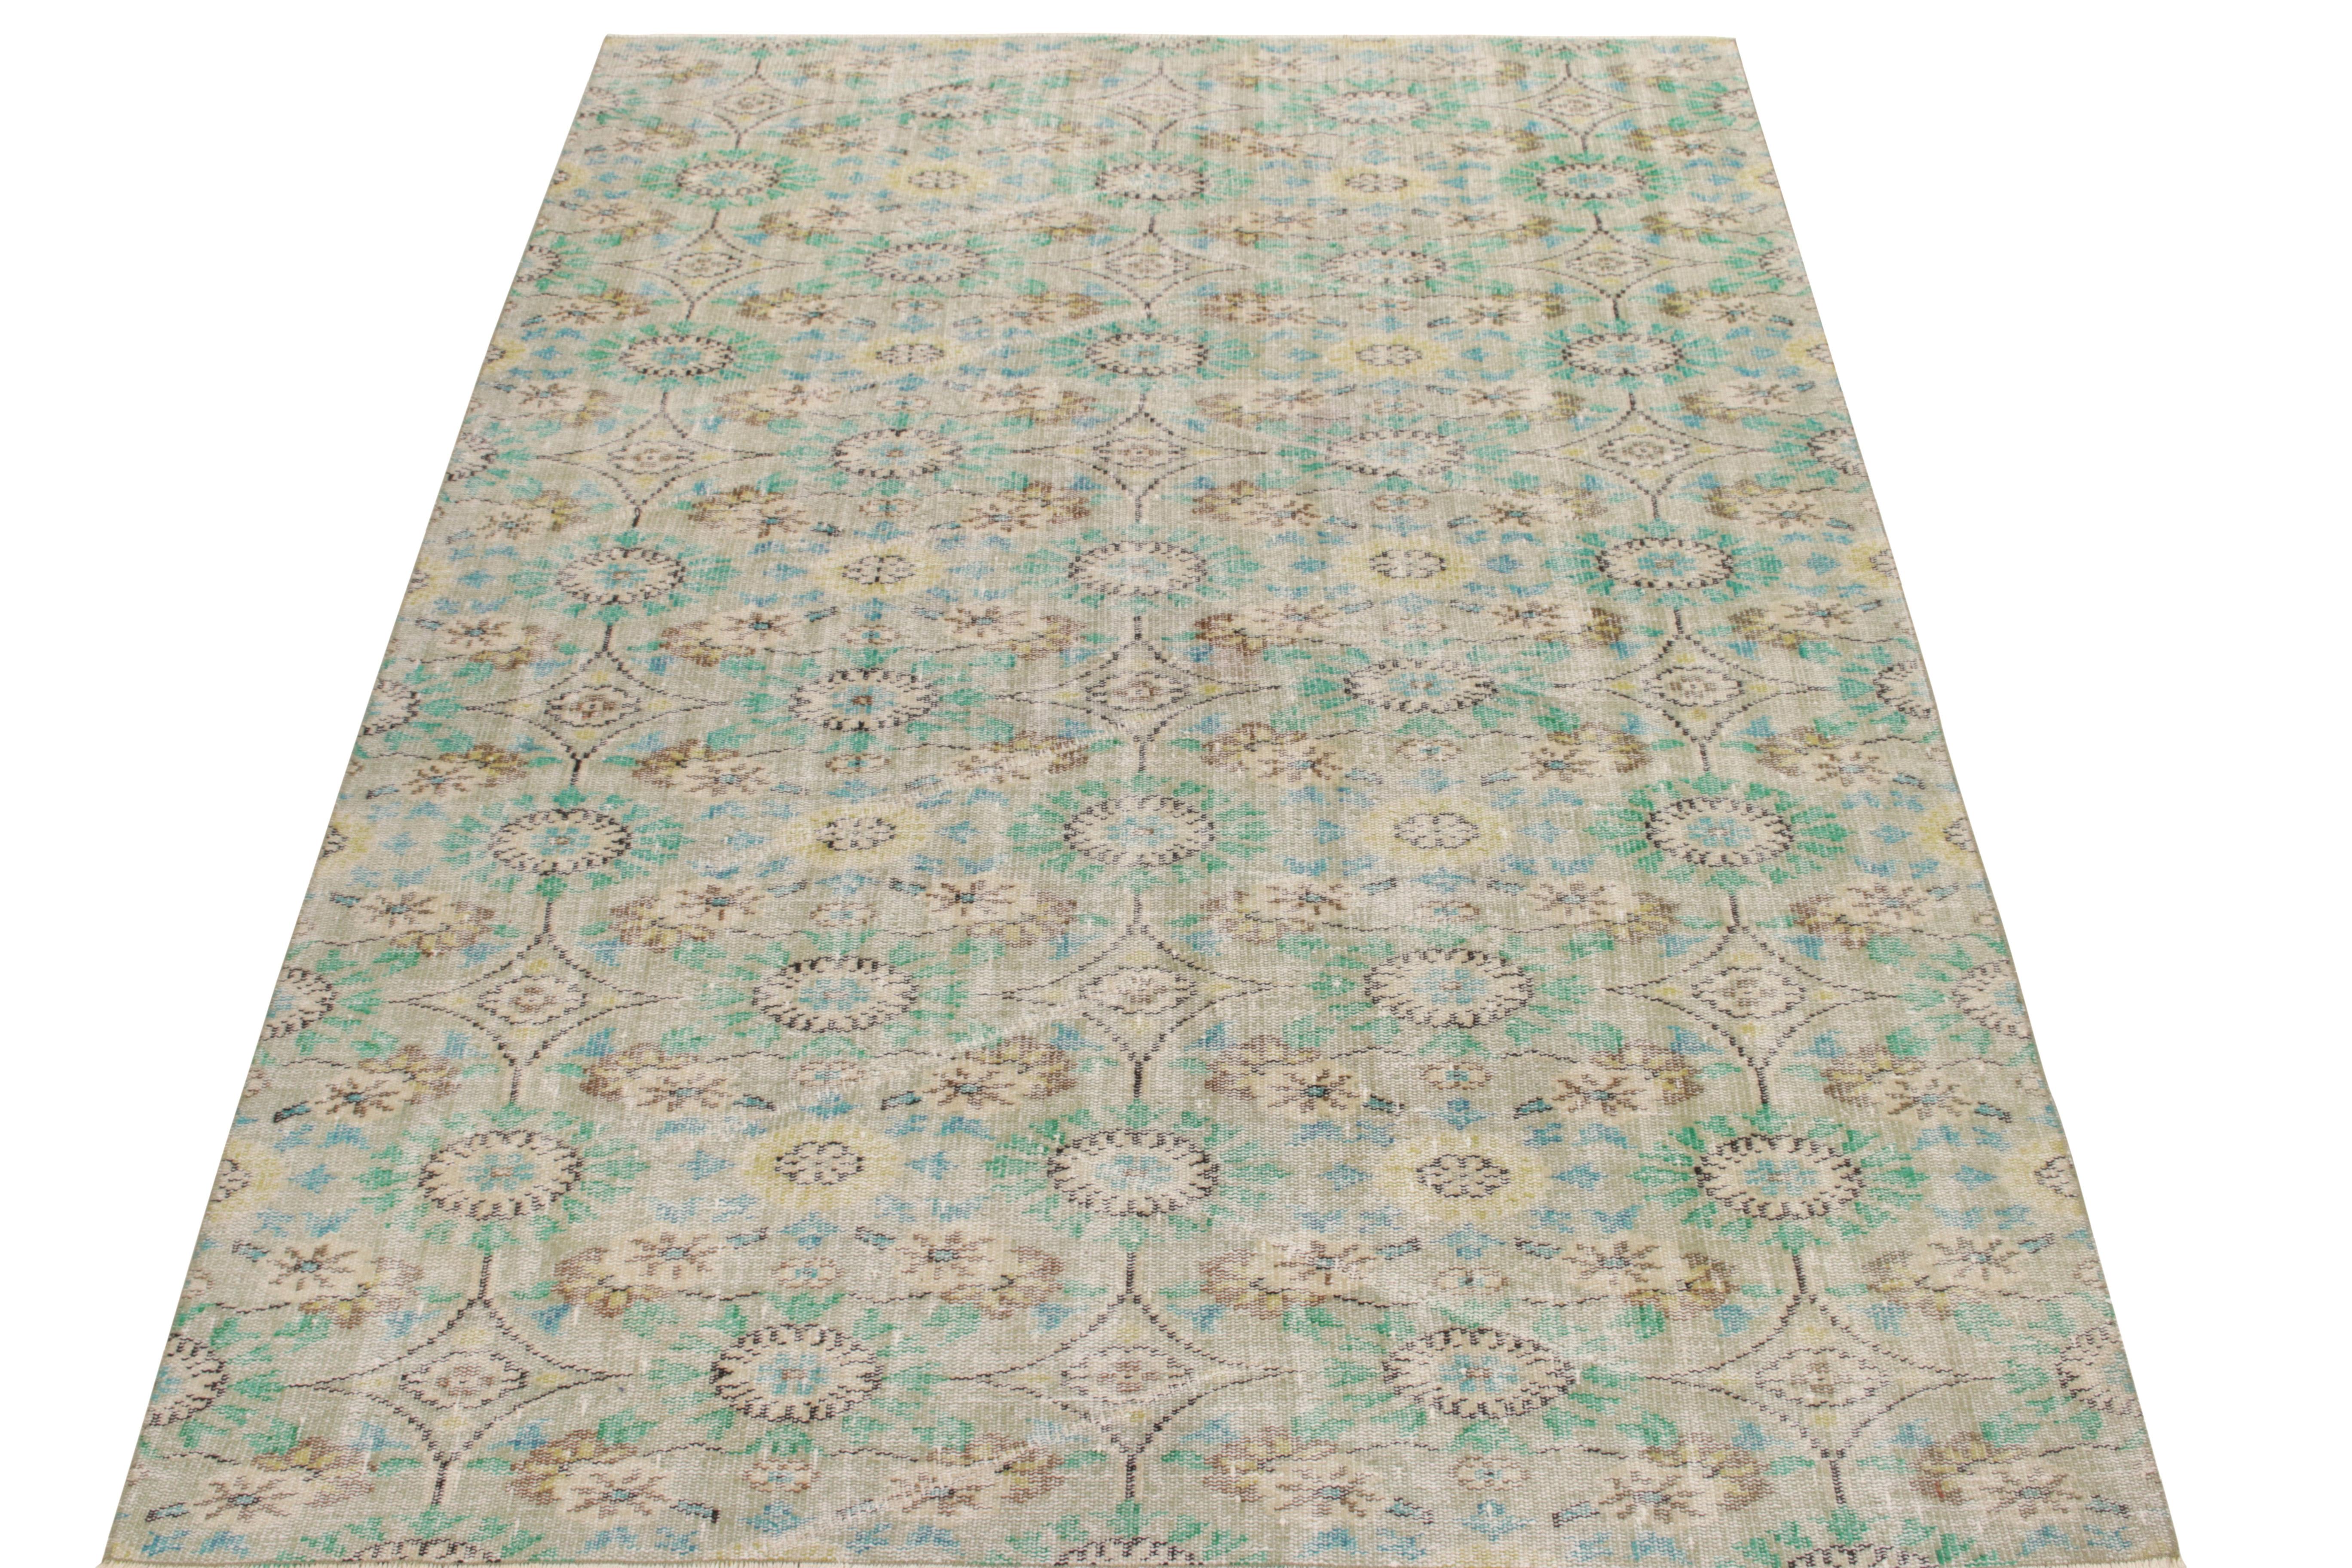 A 6 x 9 vintage rug from the workshop of a celebrated multidisciplinary Turkish designer, among the latest to join Rug & Kilim’s Mid Century Pasha collection.The gorgeous interplay of teal, aqua blue & gray complements the distress on the fine